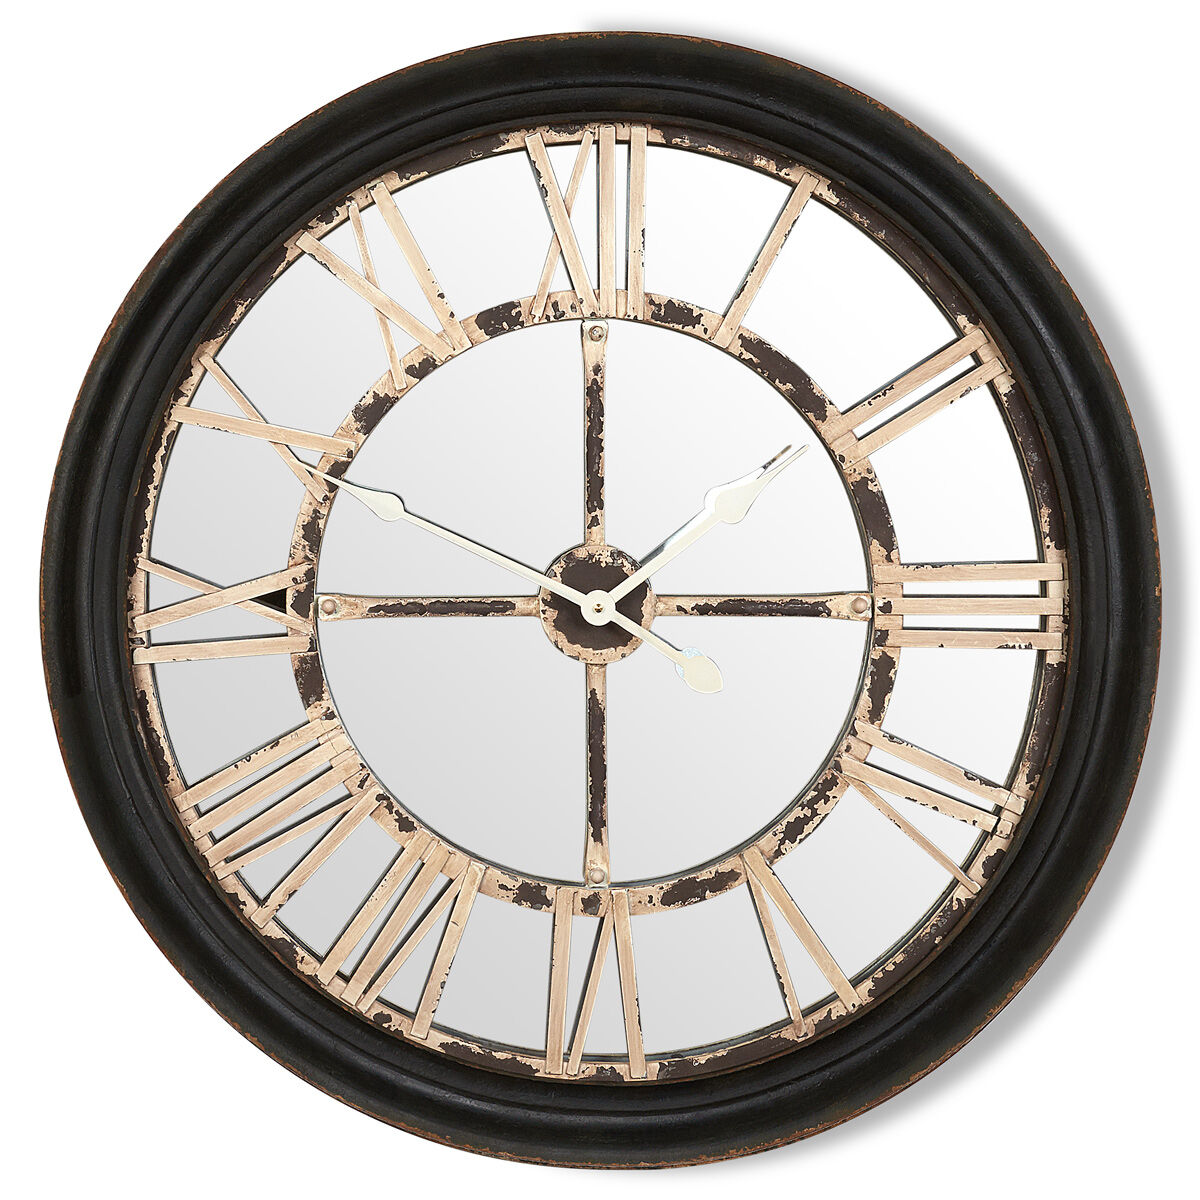 SHYFOY Mirror Glass Wall Clock - 24in Round Silver Glass Finish Decorative  Wall Clock for Living Room Office Home Decor - Walmart.com